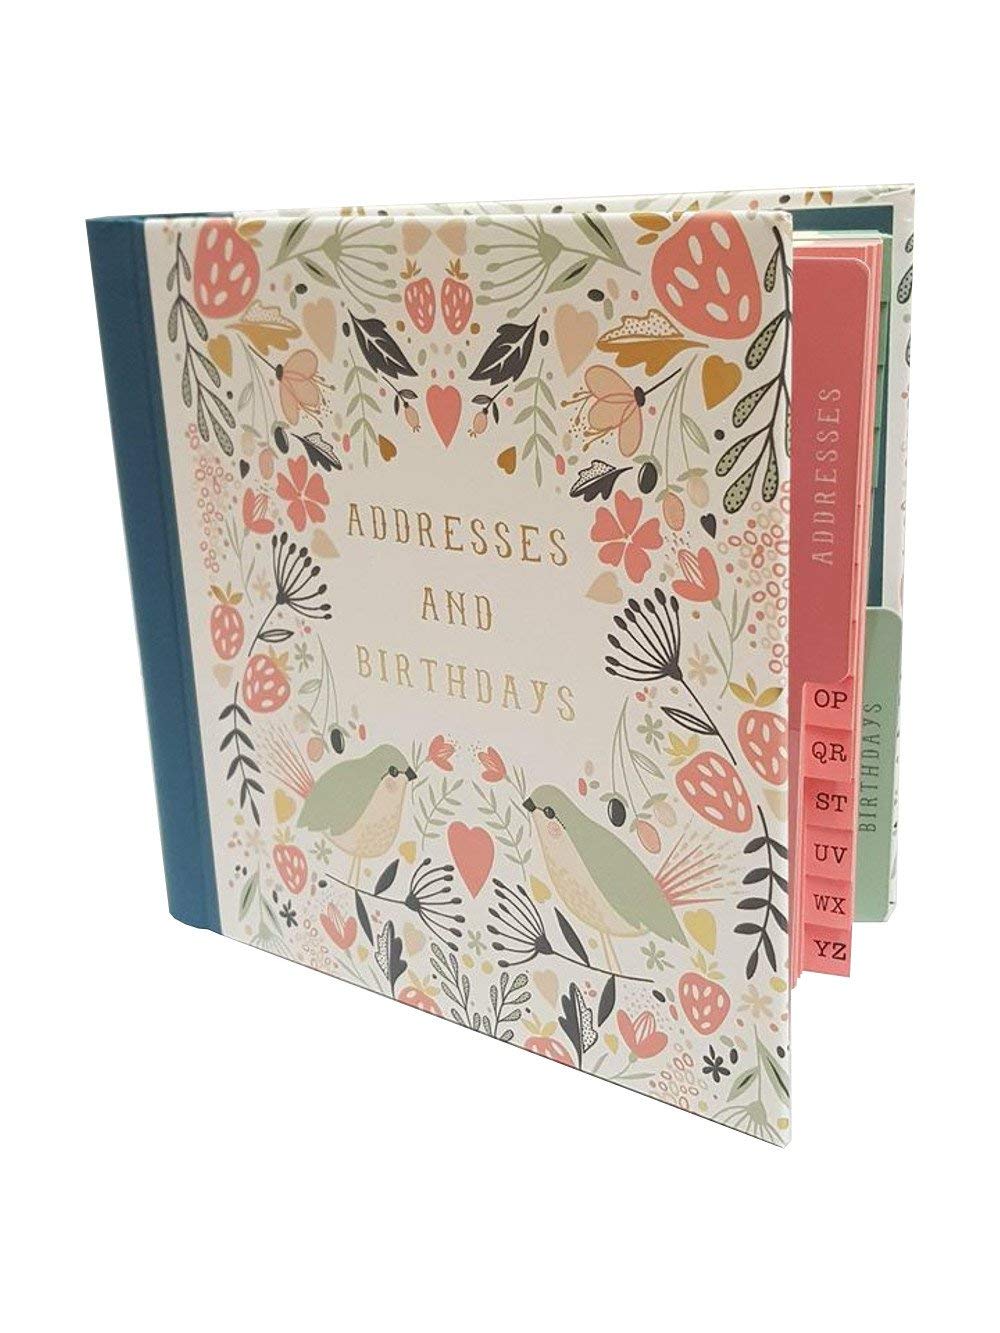 Art File Pretty Floral Birds Address and Birthday Dates Book